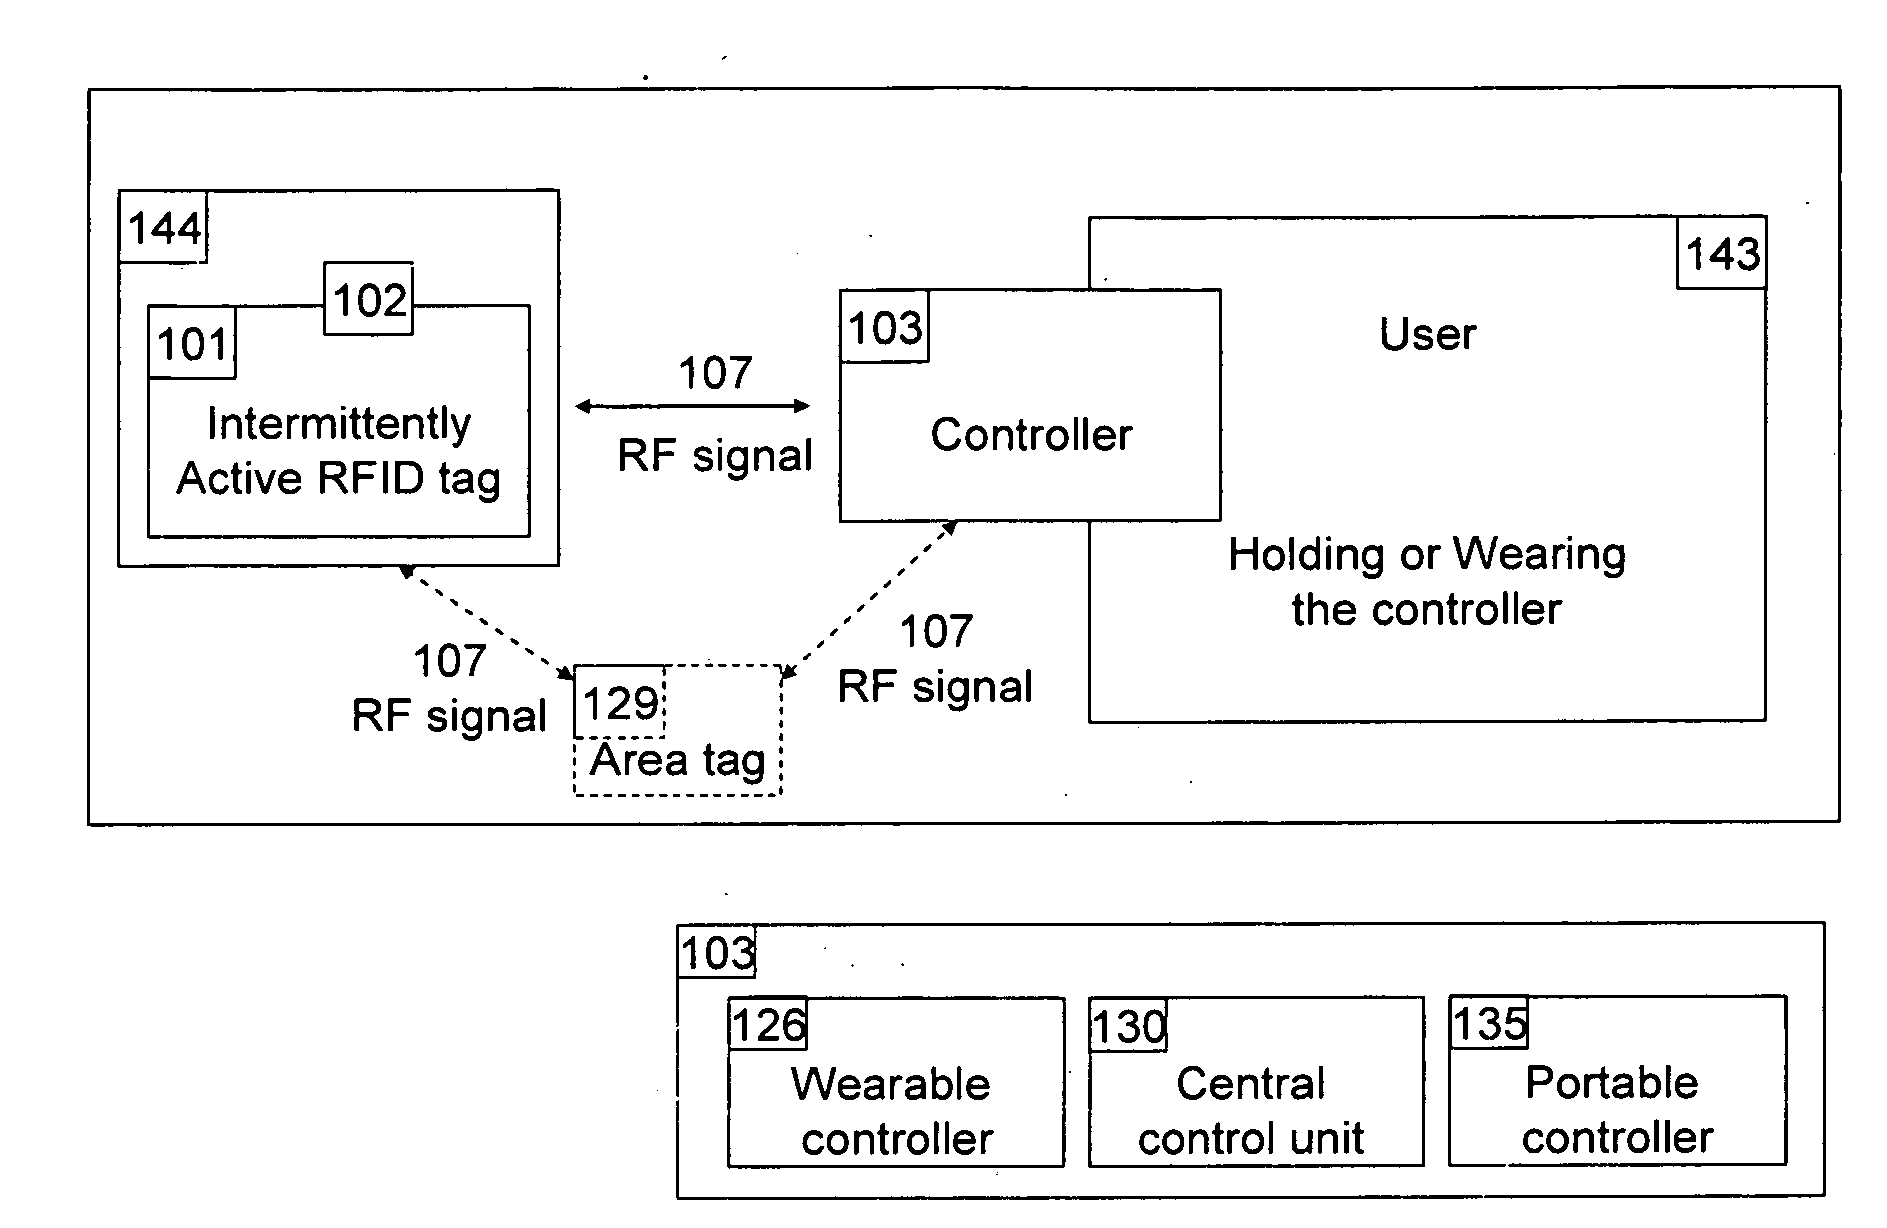 Apparatus and method for locating, tracking, controlling and recognizing tagged objects using active RFID technology.